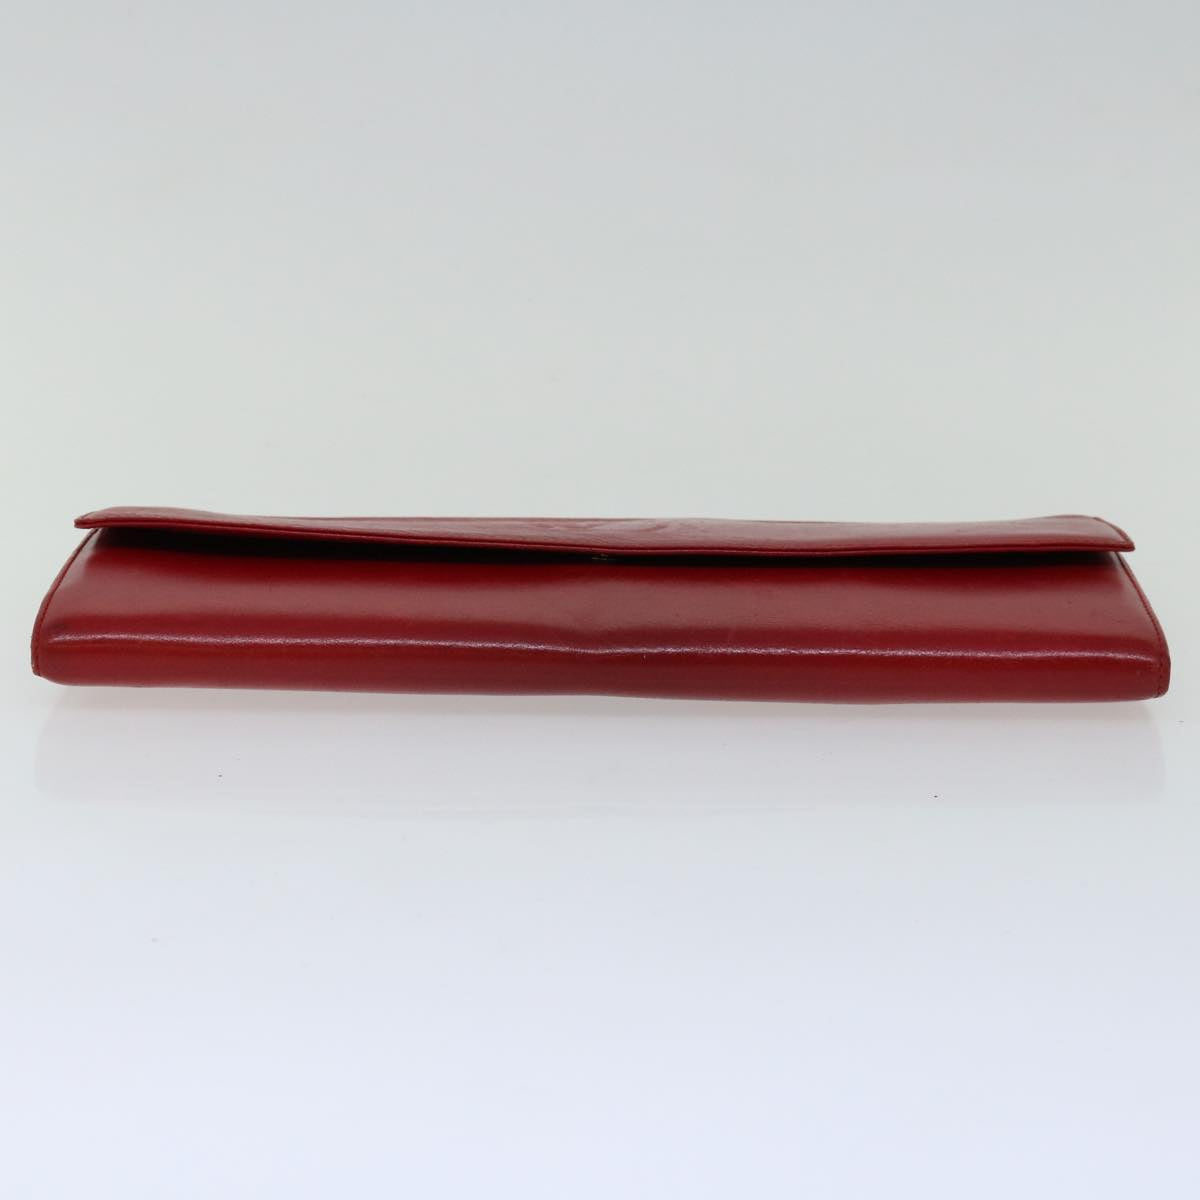 LOUIS VUITTON Mycenae Clutch Bag Leather Red M63957 LV Auth bs13222